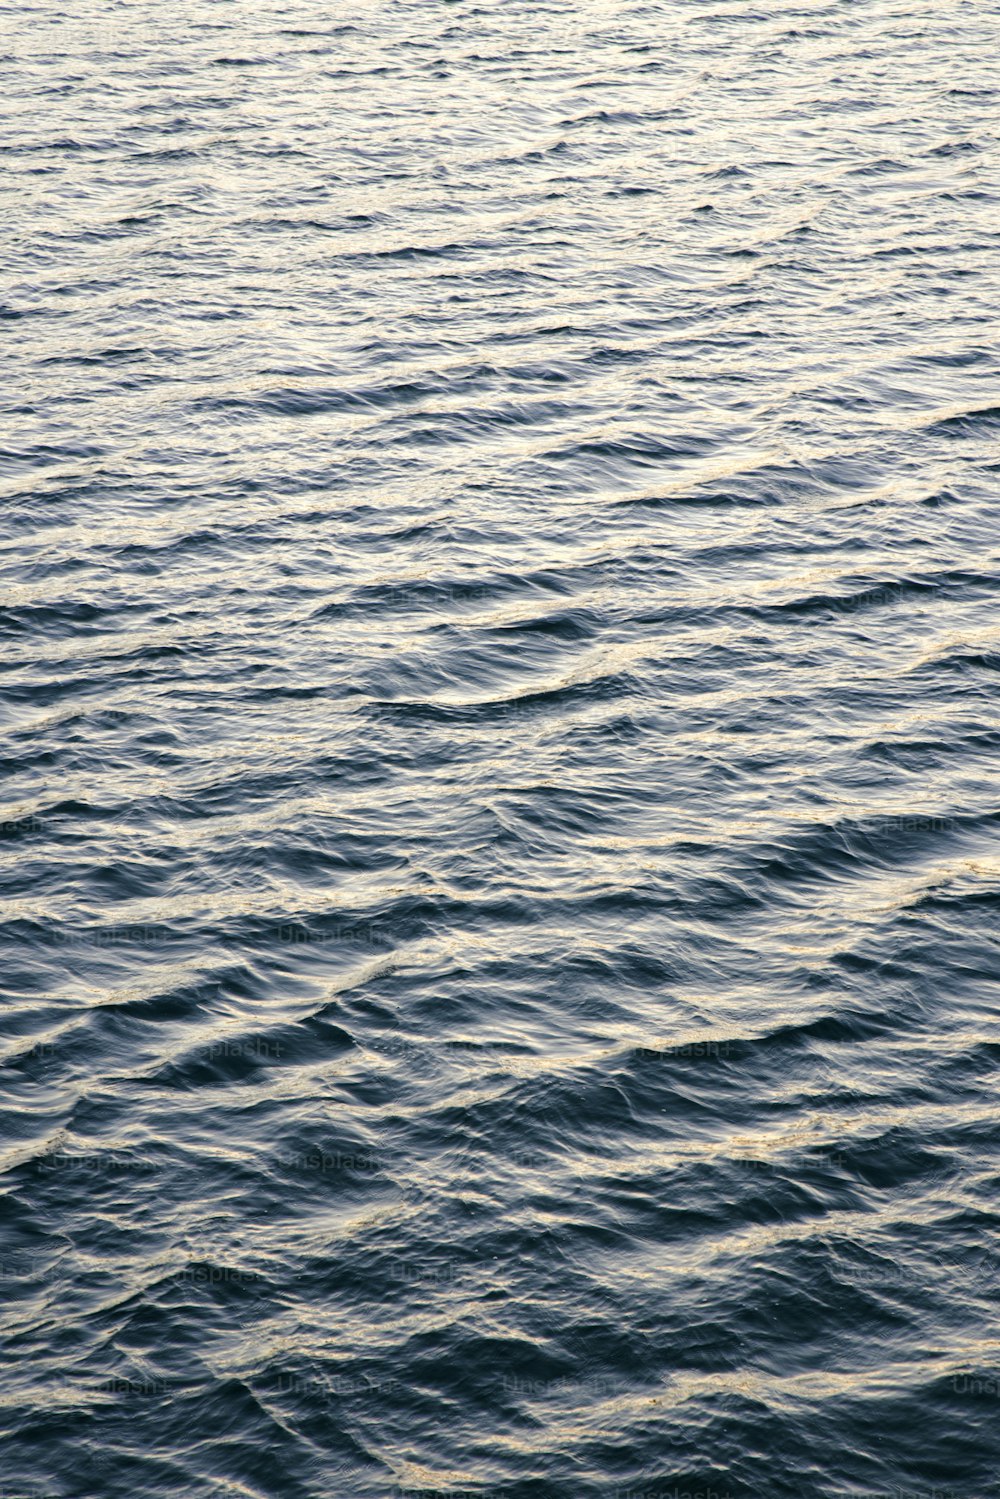 a body of water with waves